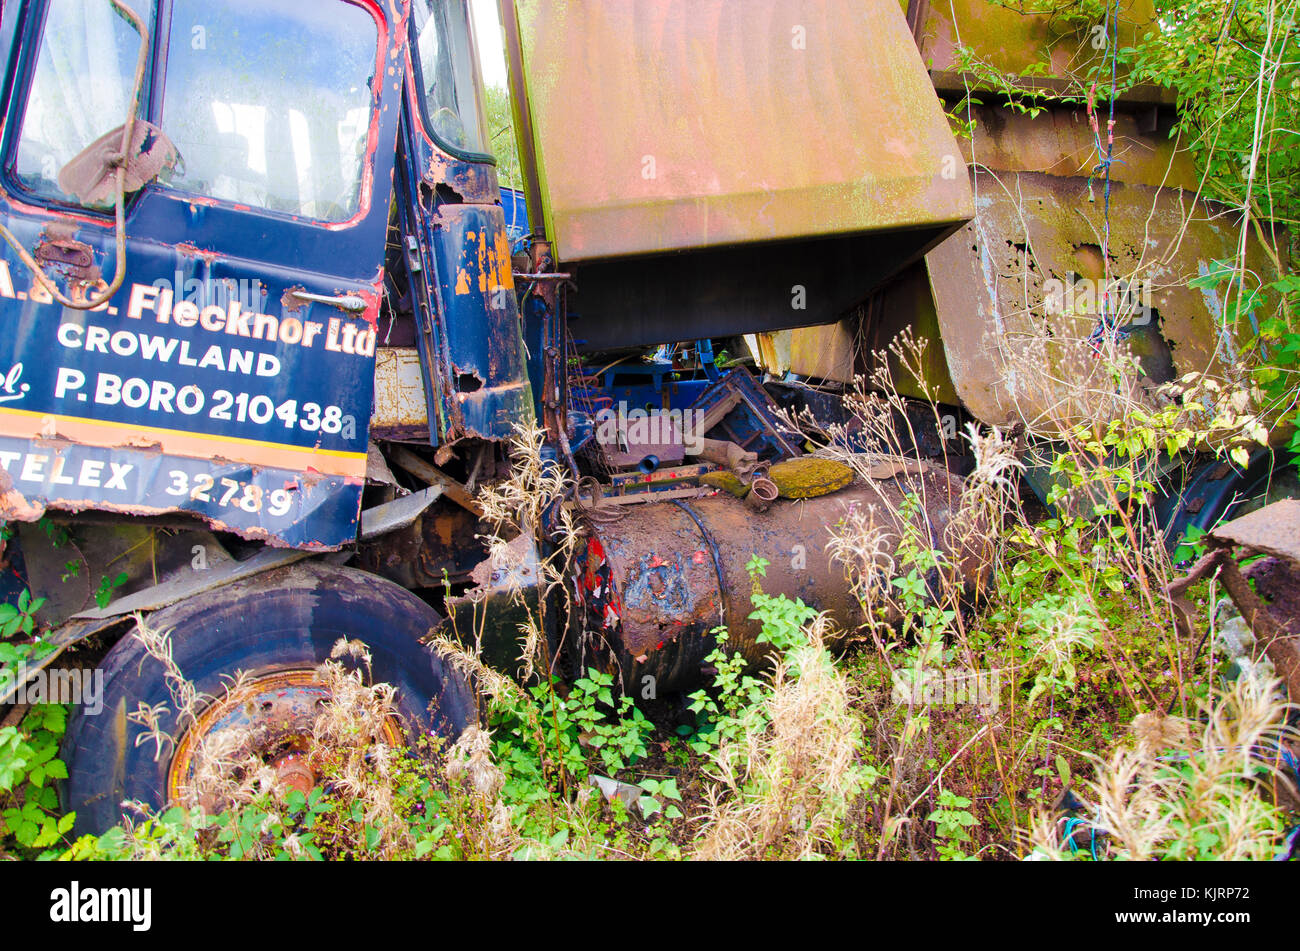 A scrap yard that specifically holds broken down vehicles for scrap and vehicle parts completely over grown and abandoned vehicles. Stock Photo